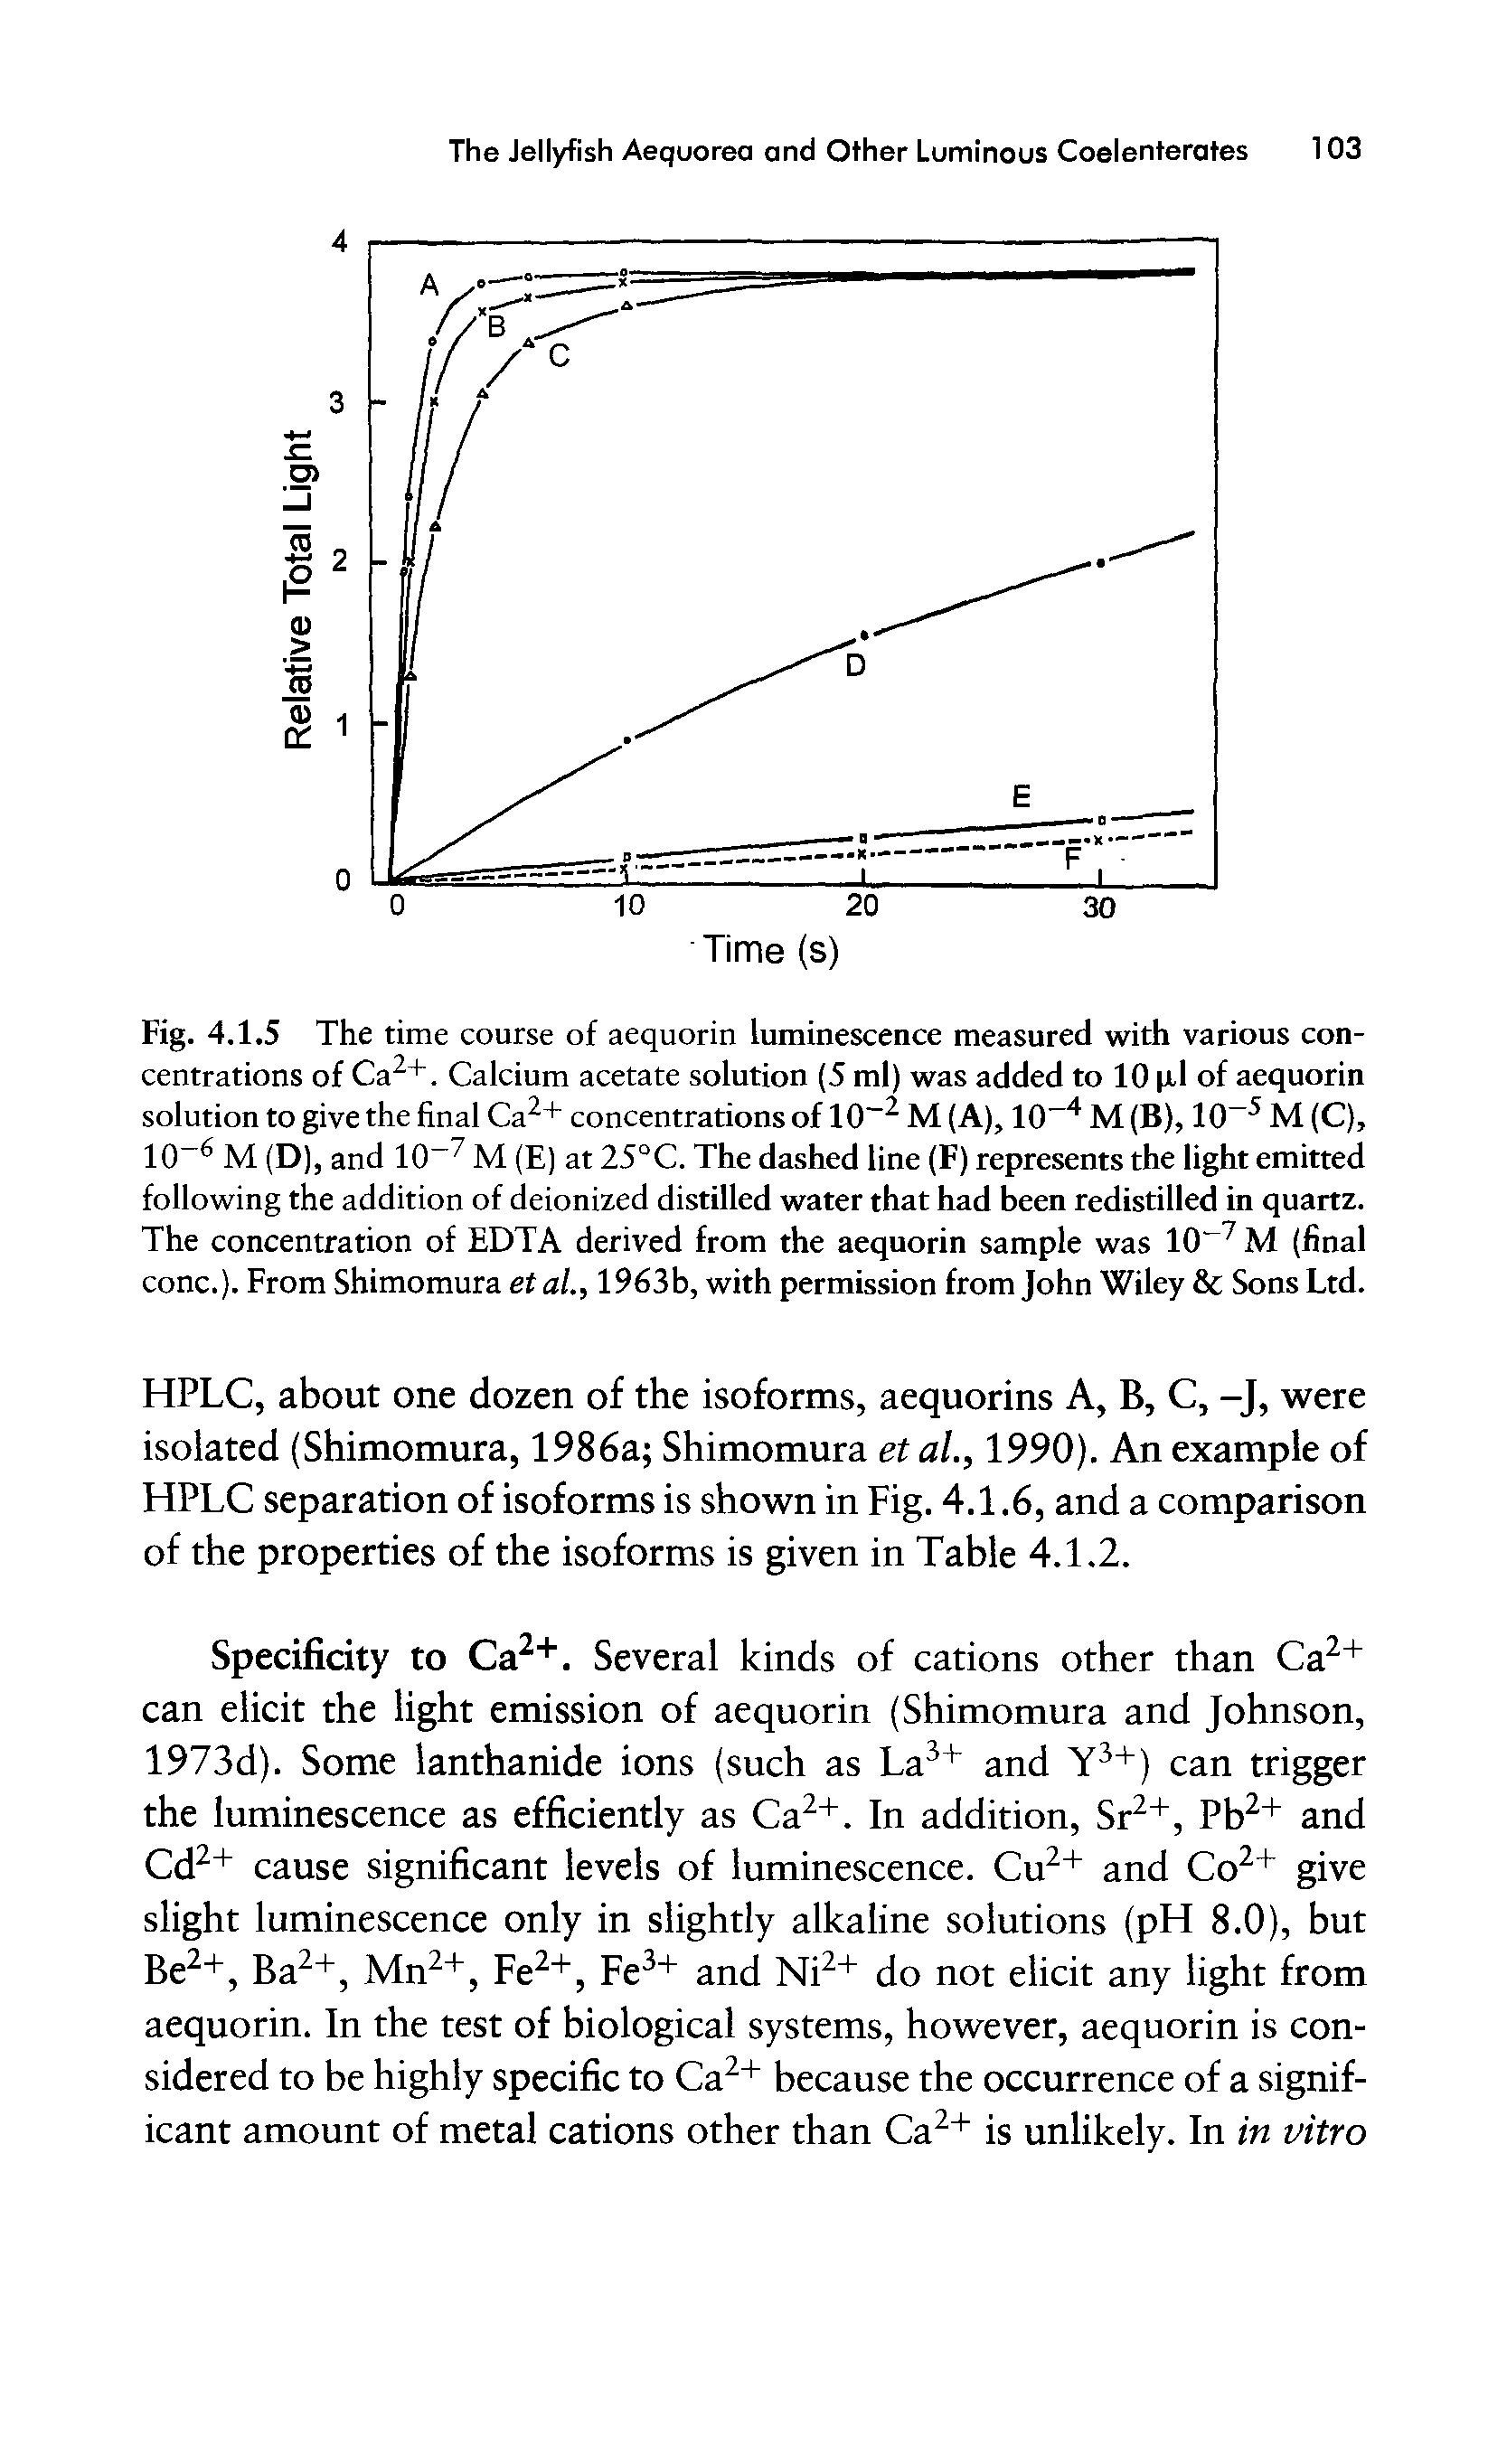 Fig. 4.1.5 The time course of aequorin luminescence measured with various concentrations of Ca2+. Calcium acetate solution (5 ml) was added to 10 pi of aequorin solution to give the final Ca2+ concentrations of 10 2 M (A), 10-4 M (B), 10-5 M (C), 10 6 M (D), and 10 7 M (E) at 25°C. The dashed line (F) represents the light emitted following the addition of deionized distilled water that had been redistilled in quartz. The concentration of EDTA derived from the aequorin sample was 10 7 M (final cone.). From Shimomura et al., 1963b, with permission from John Wiley Sons Ltd.